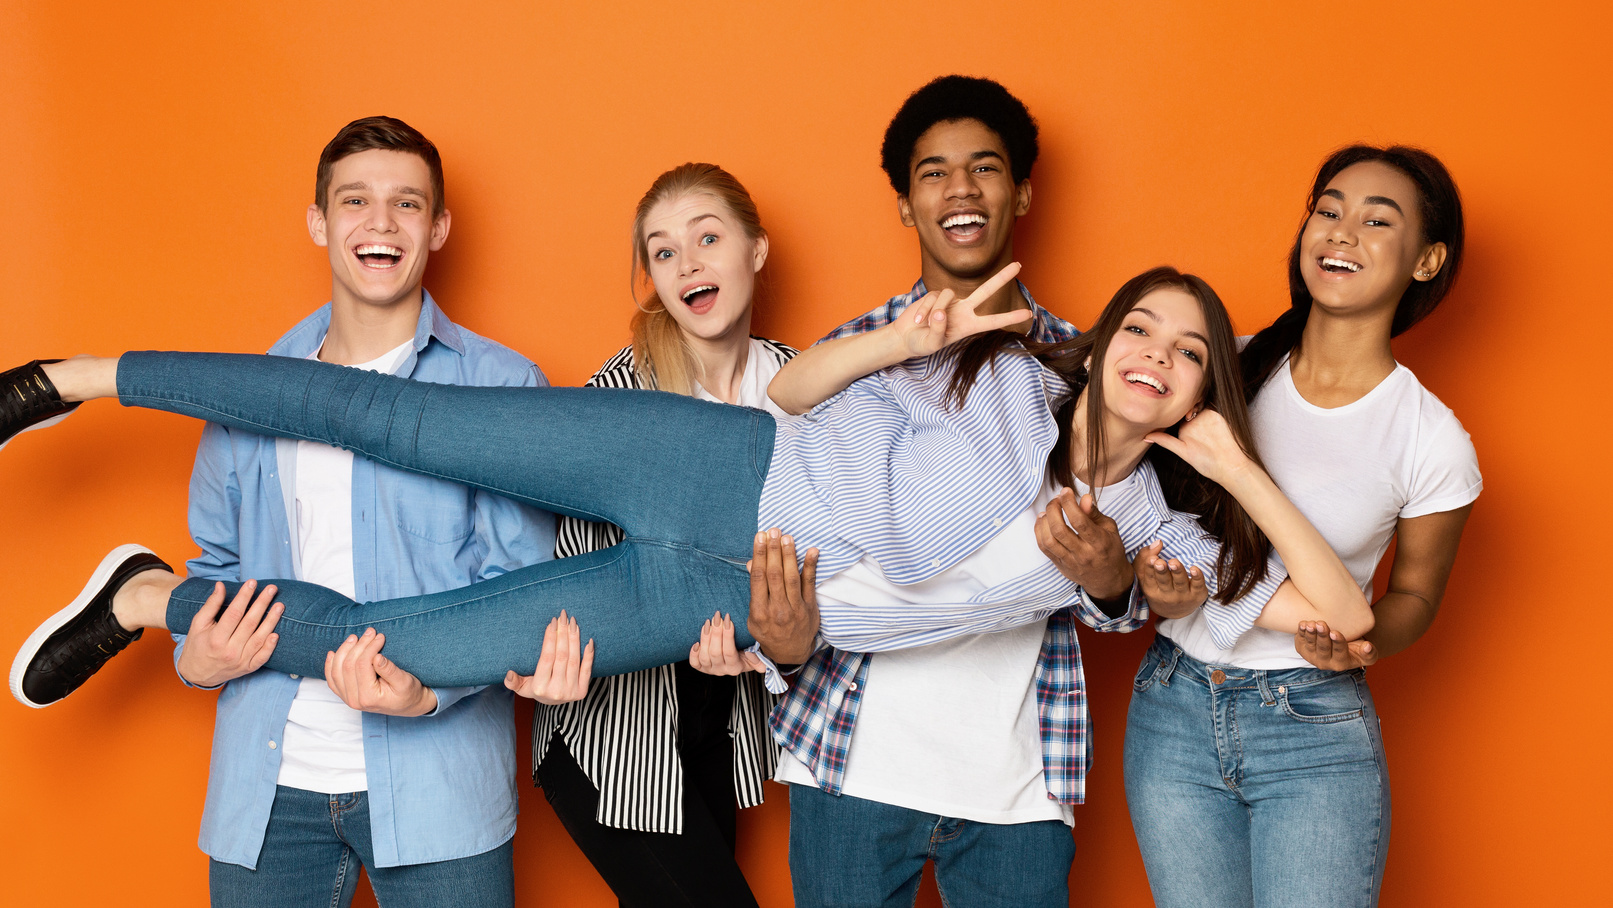 Youth and friendship. Teens holding friend and posing